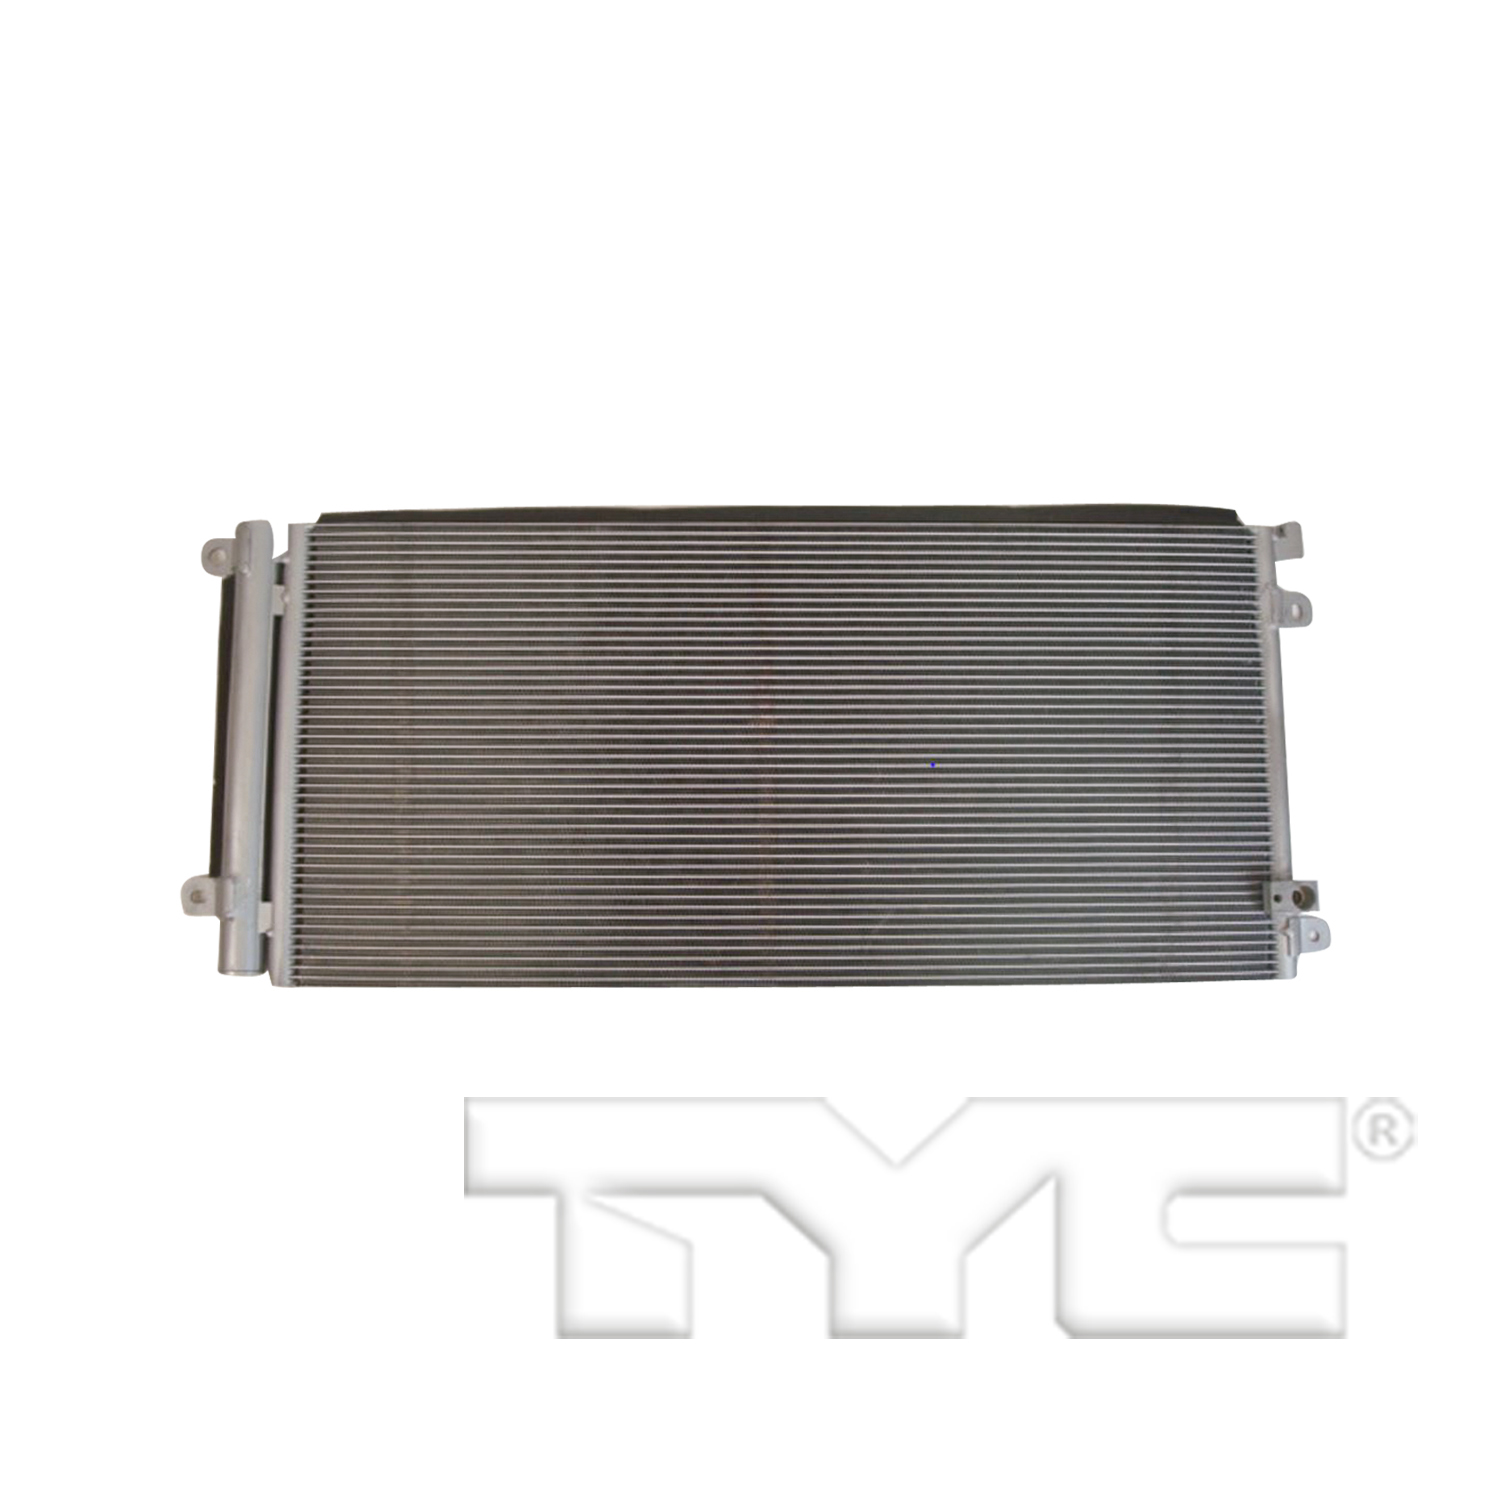 Aftermarket AC CONDENSERS for HONDA - CIVIC, CIVIC,16-21,Air conditioning condenser